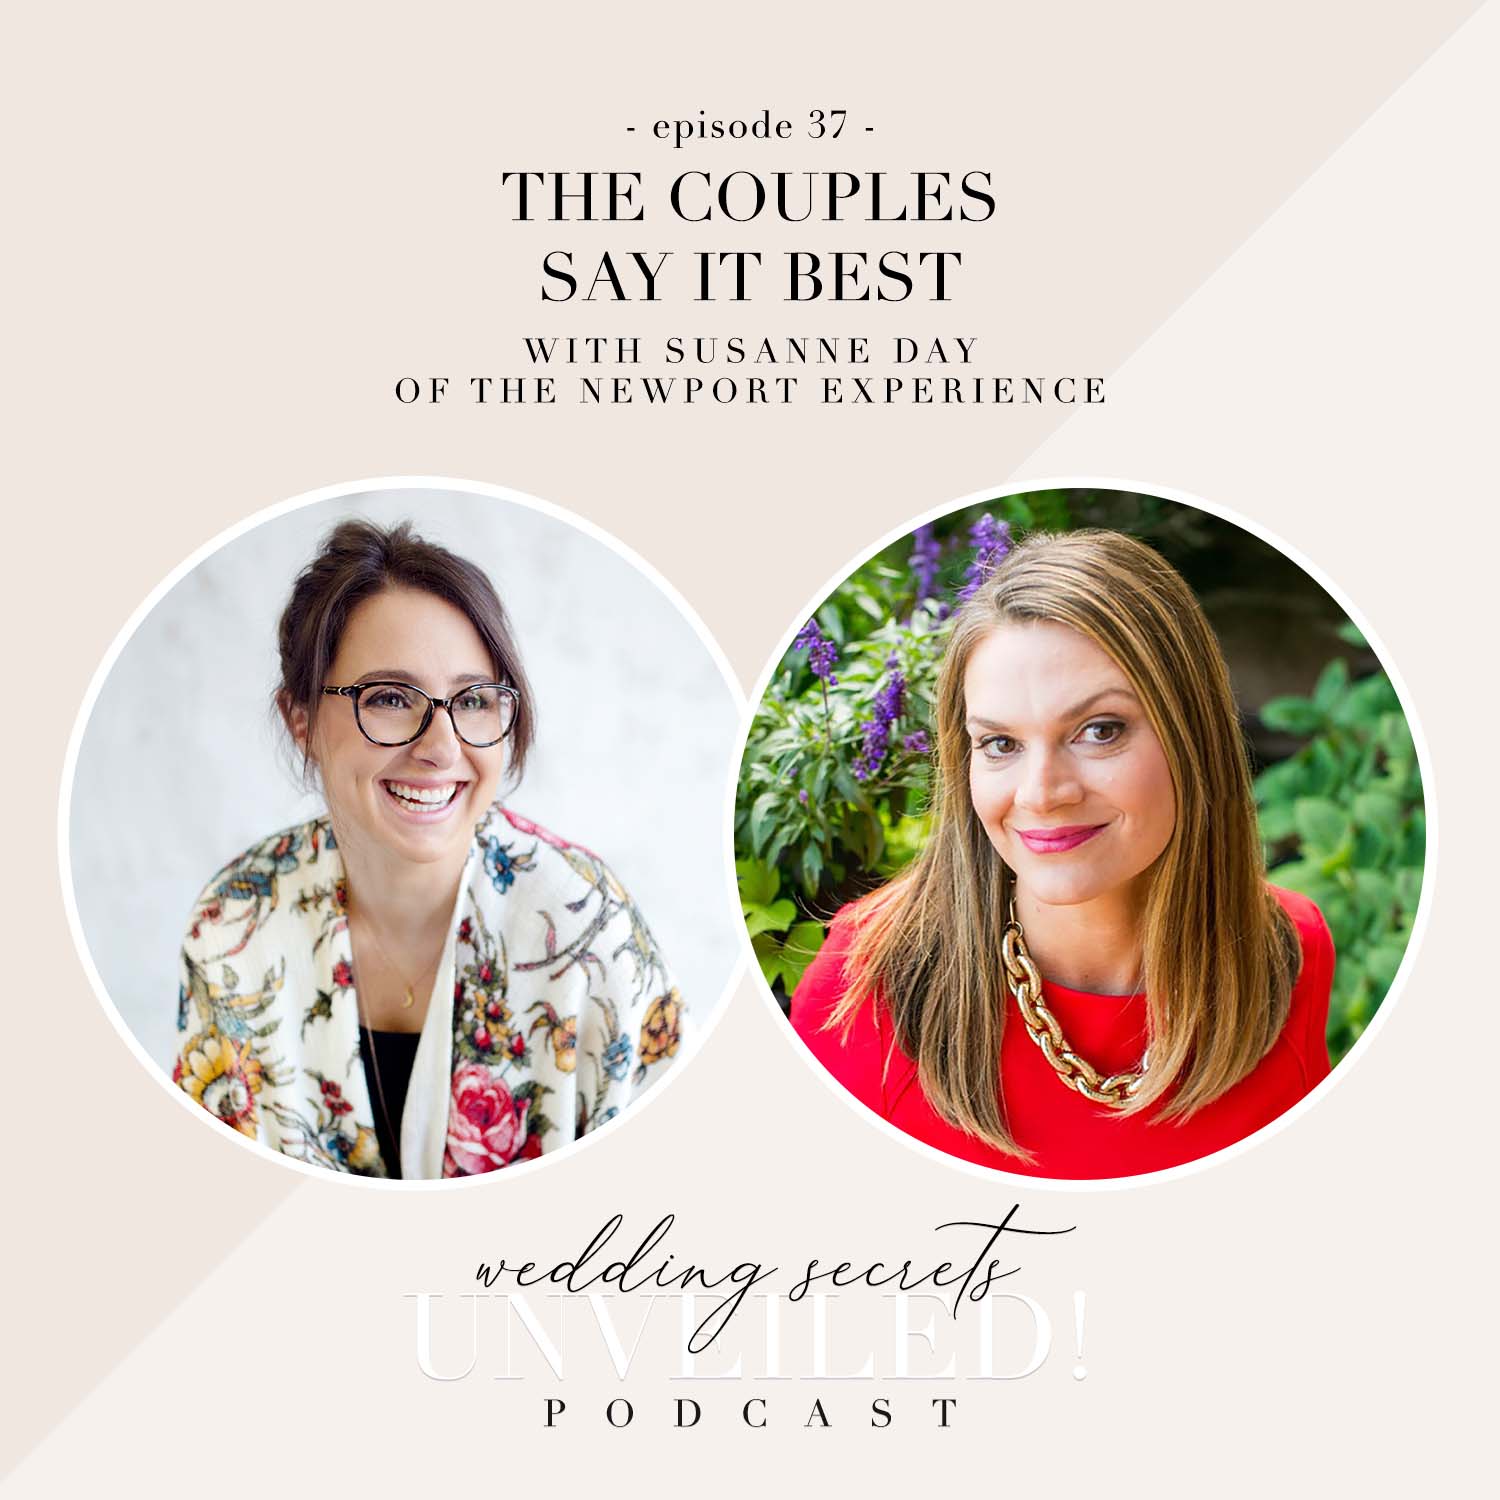 Sara Zarrella and Susanne Day of Newport Experience interview couples planning their weddings on Wedding Secrets Unveiled! Podcast